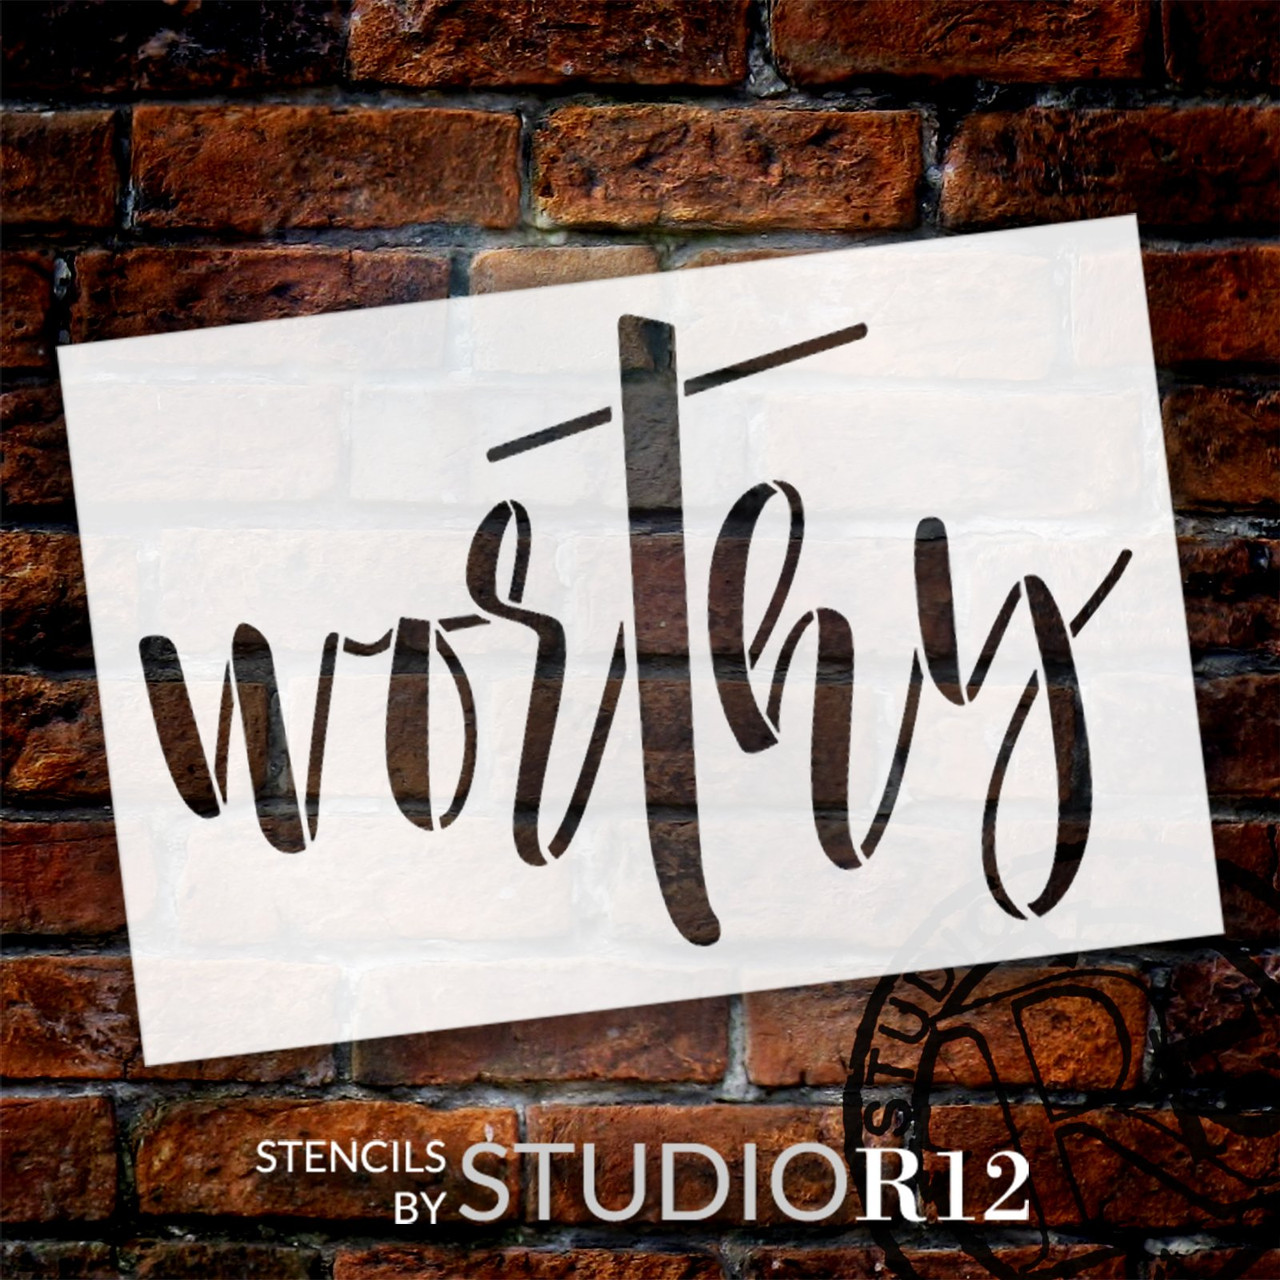 Worthy Script with Cross Stencil by StudioR12 | Craft DIY Religious Home Decor | Paint Faith Wood Sign | Reusable Mylar Template | Select Size